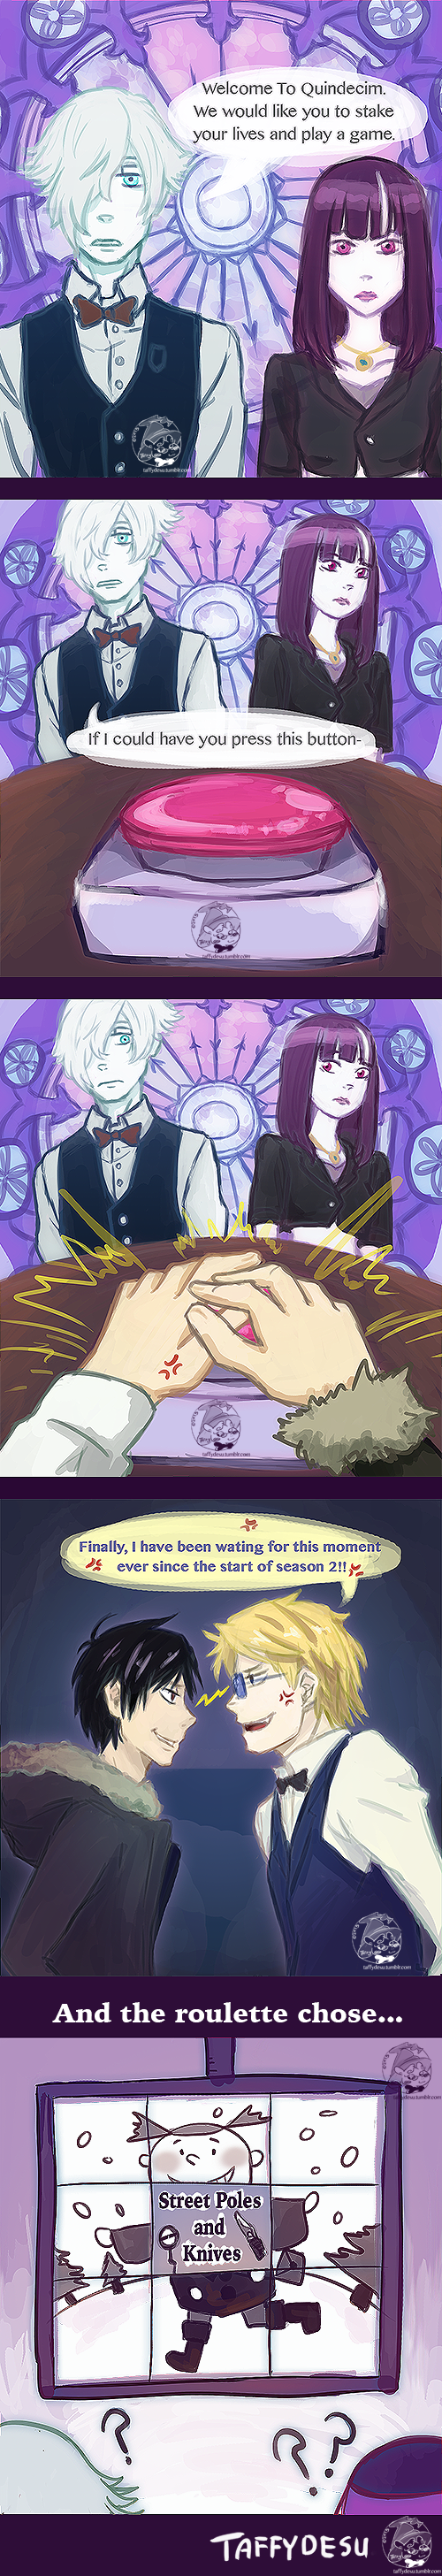 Why fans need a season 2 of Death Parade